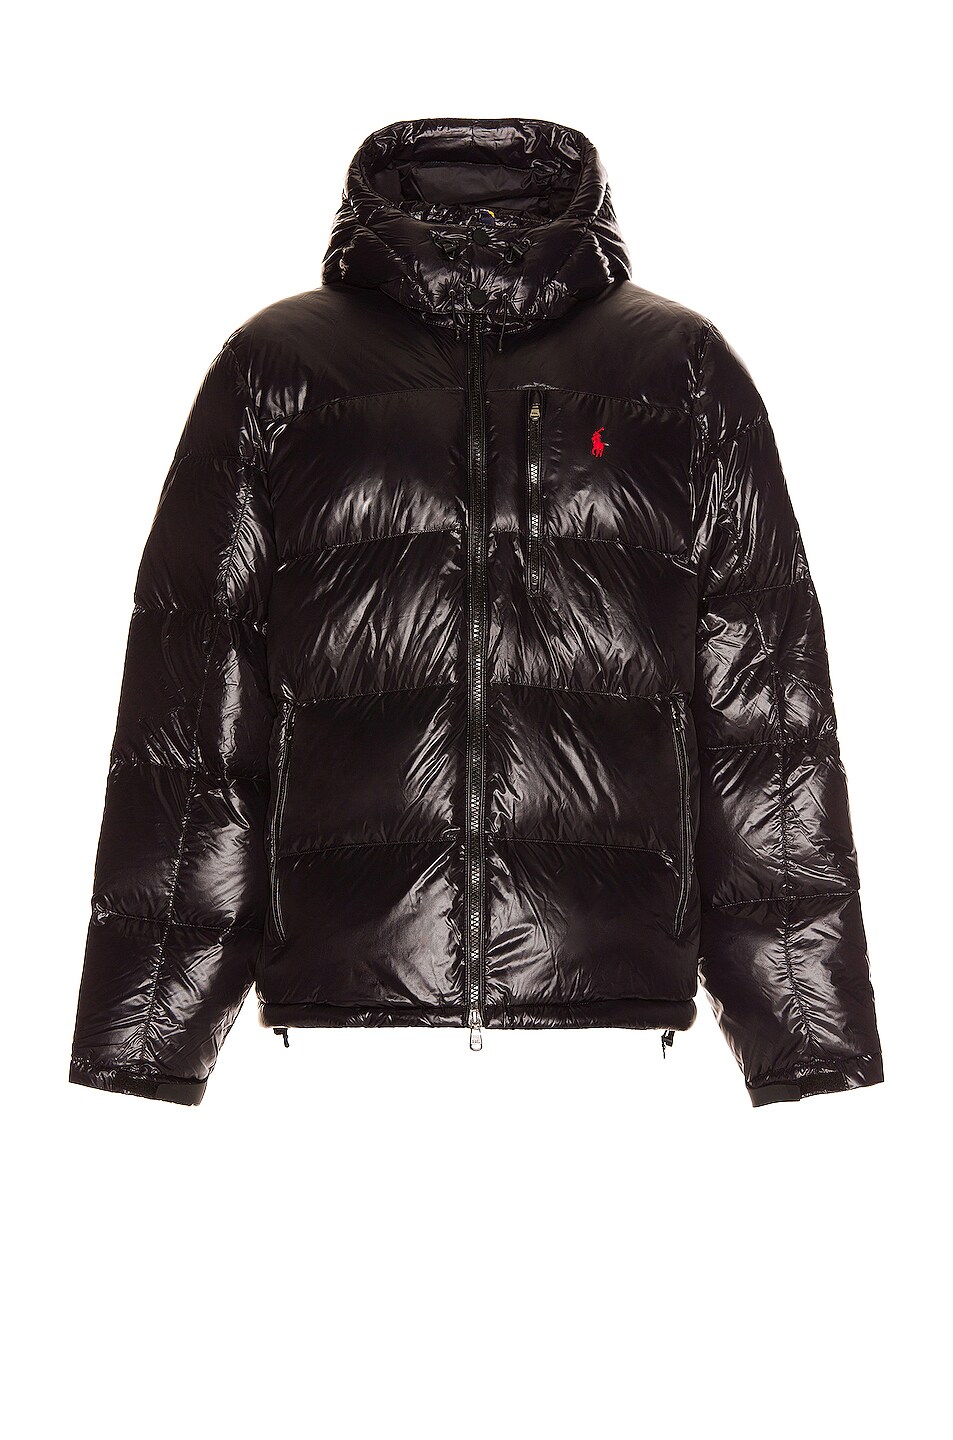 Image 1 of Polo Ralph Lauren Bomber Jacket in Glossy Black